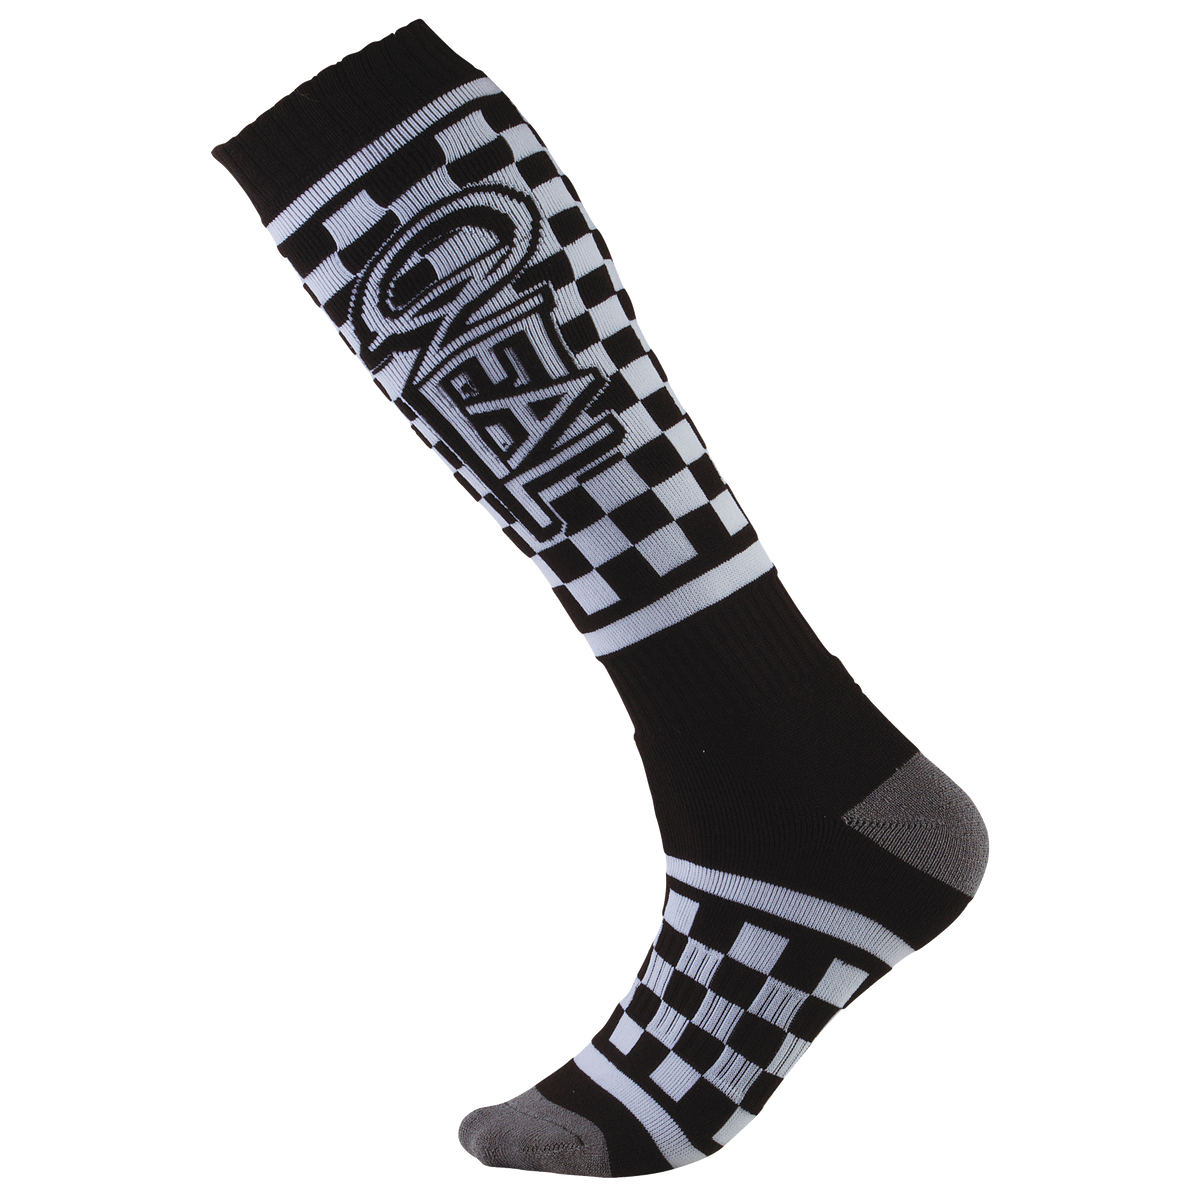 https://cdn.oneal.eu/assets/importedProductImages/ACCESSORIES/PRO%20MX%20SOCKS/VICTORY/2016_ONeal_MXSock_Victory.png